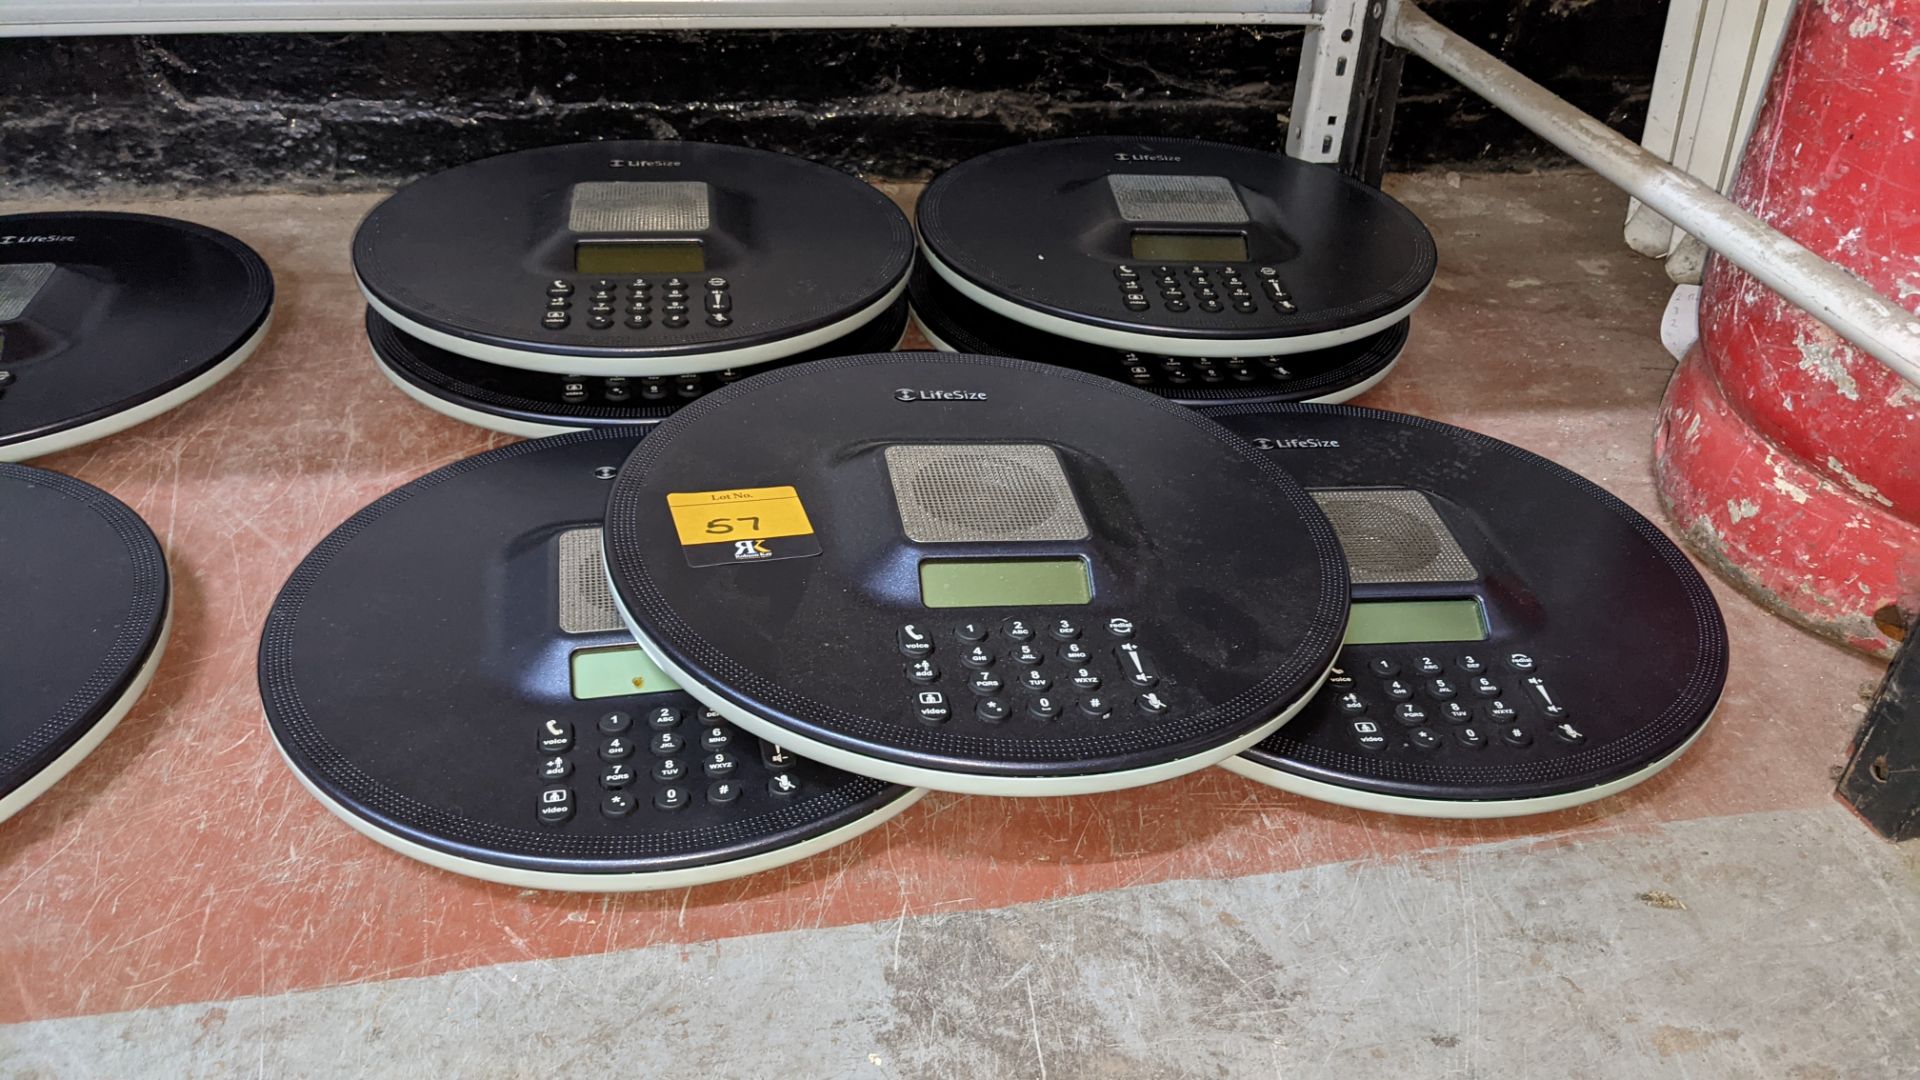 7 off LifeSize phones. NB lots 46 - 47, 53 - 57 & 88 all consist of LifeSize equipment - Image 2 of 9